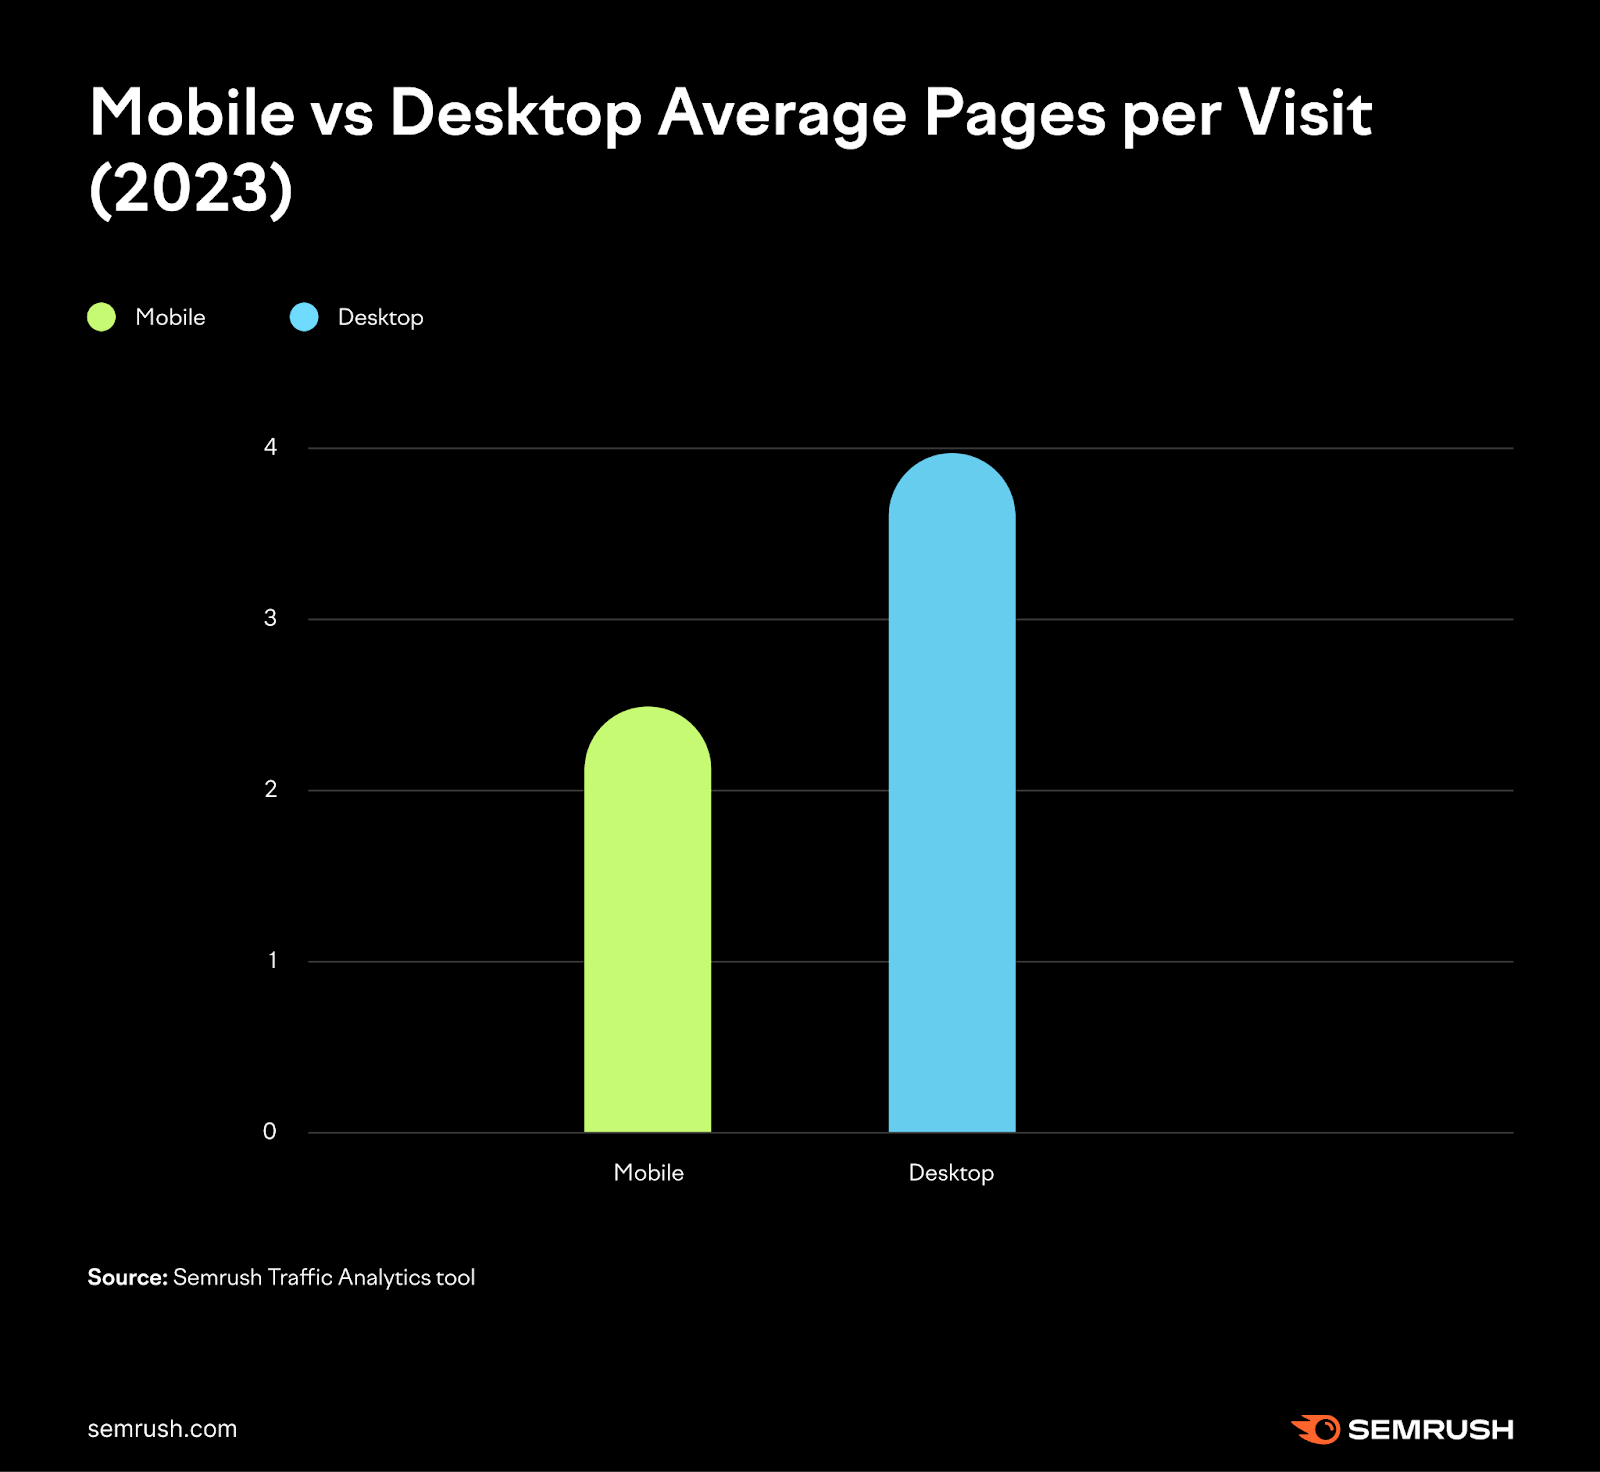 A chart showing mobile vs desktop average pages per visit in 2023, using data from Traffic Analytics tool